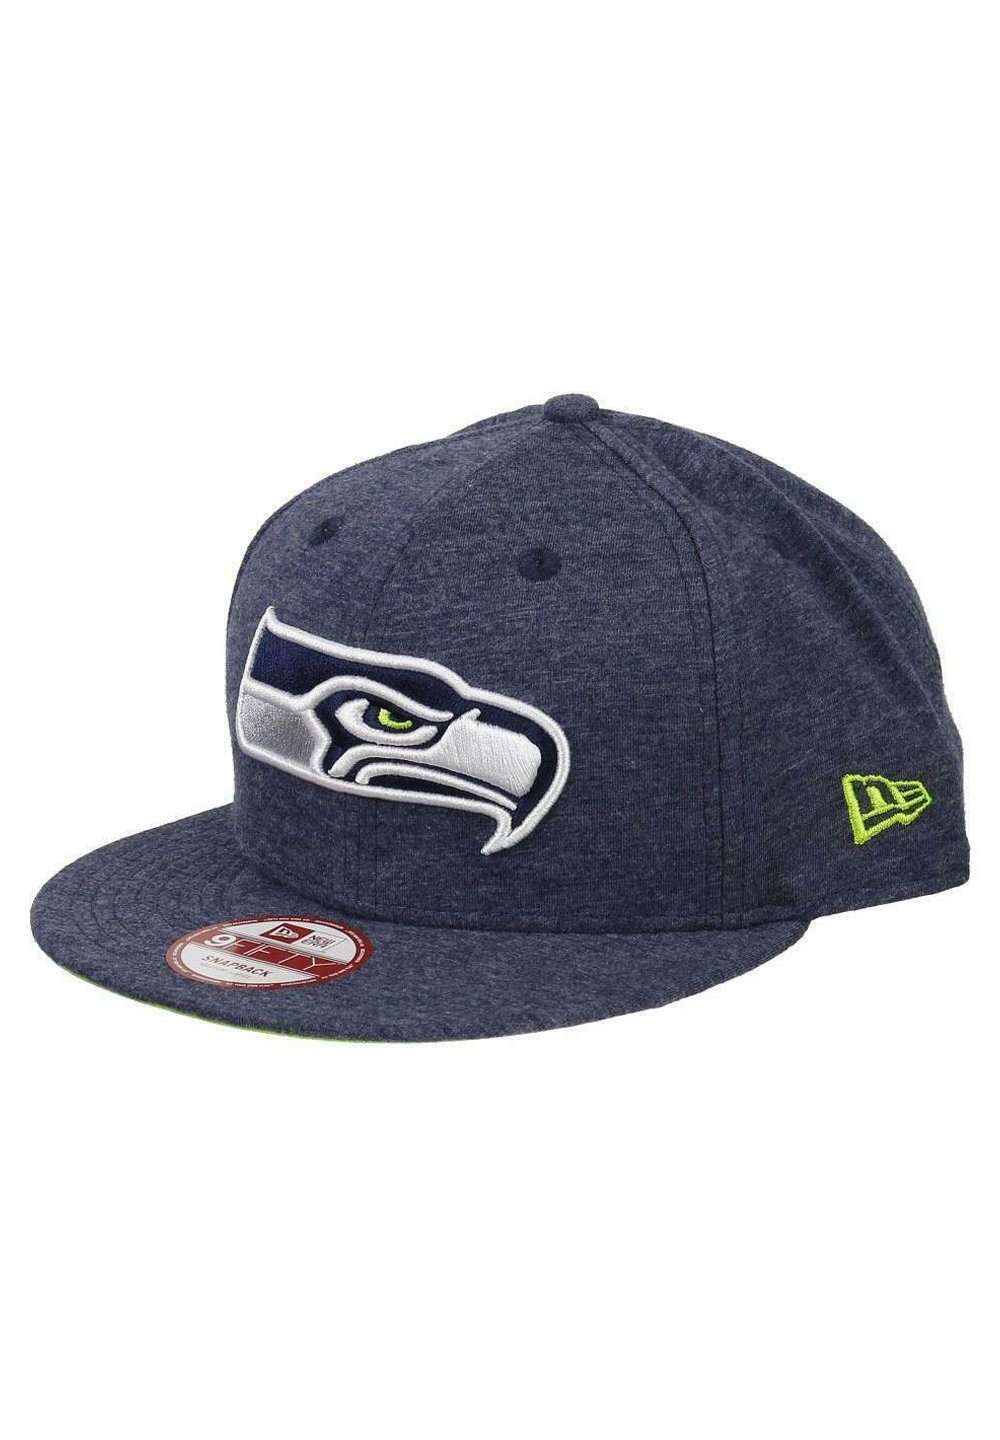 Кепка SEATTLE SEAHAWKS TEAM 9FIFTY